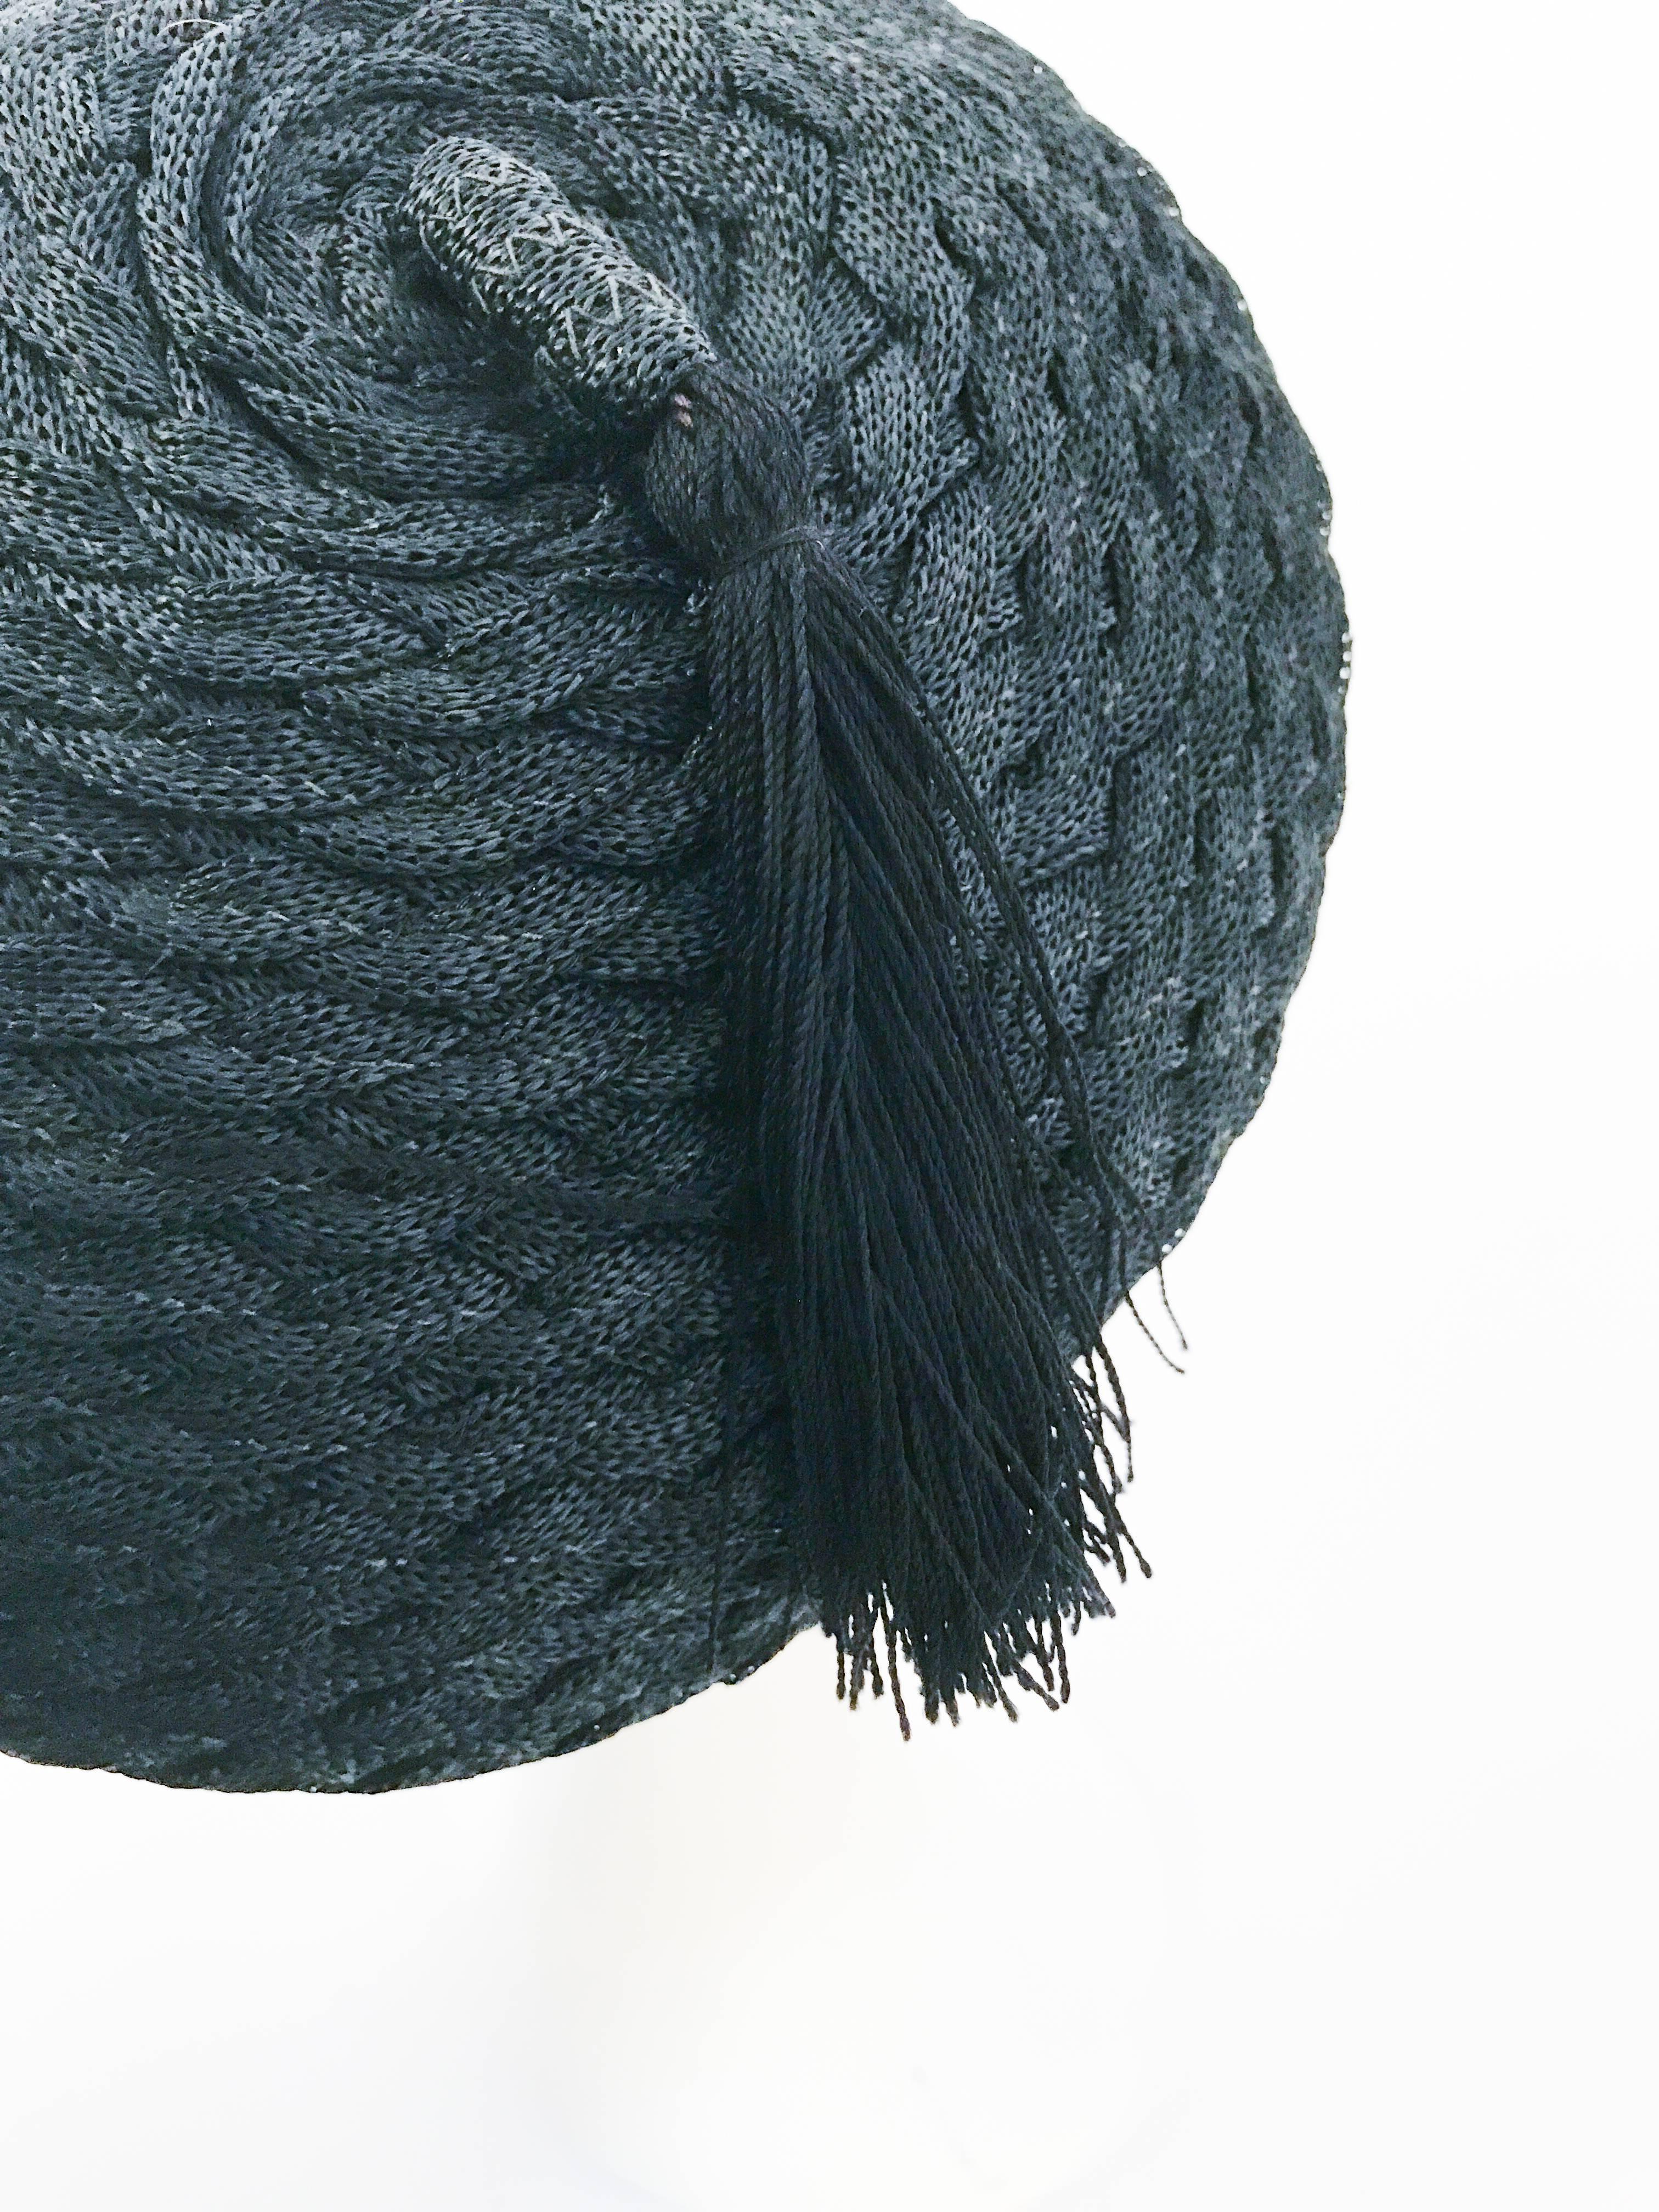 1930s Black Braided Hat with Matching Tassel For Sale 2